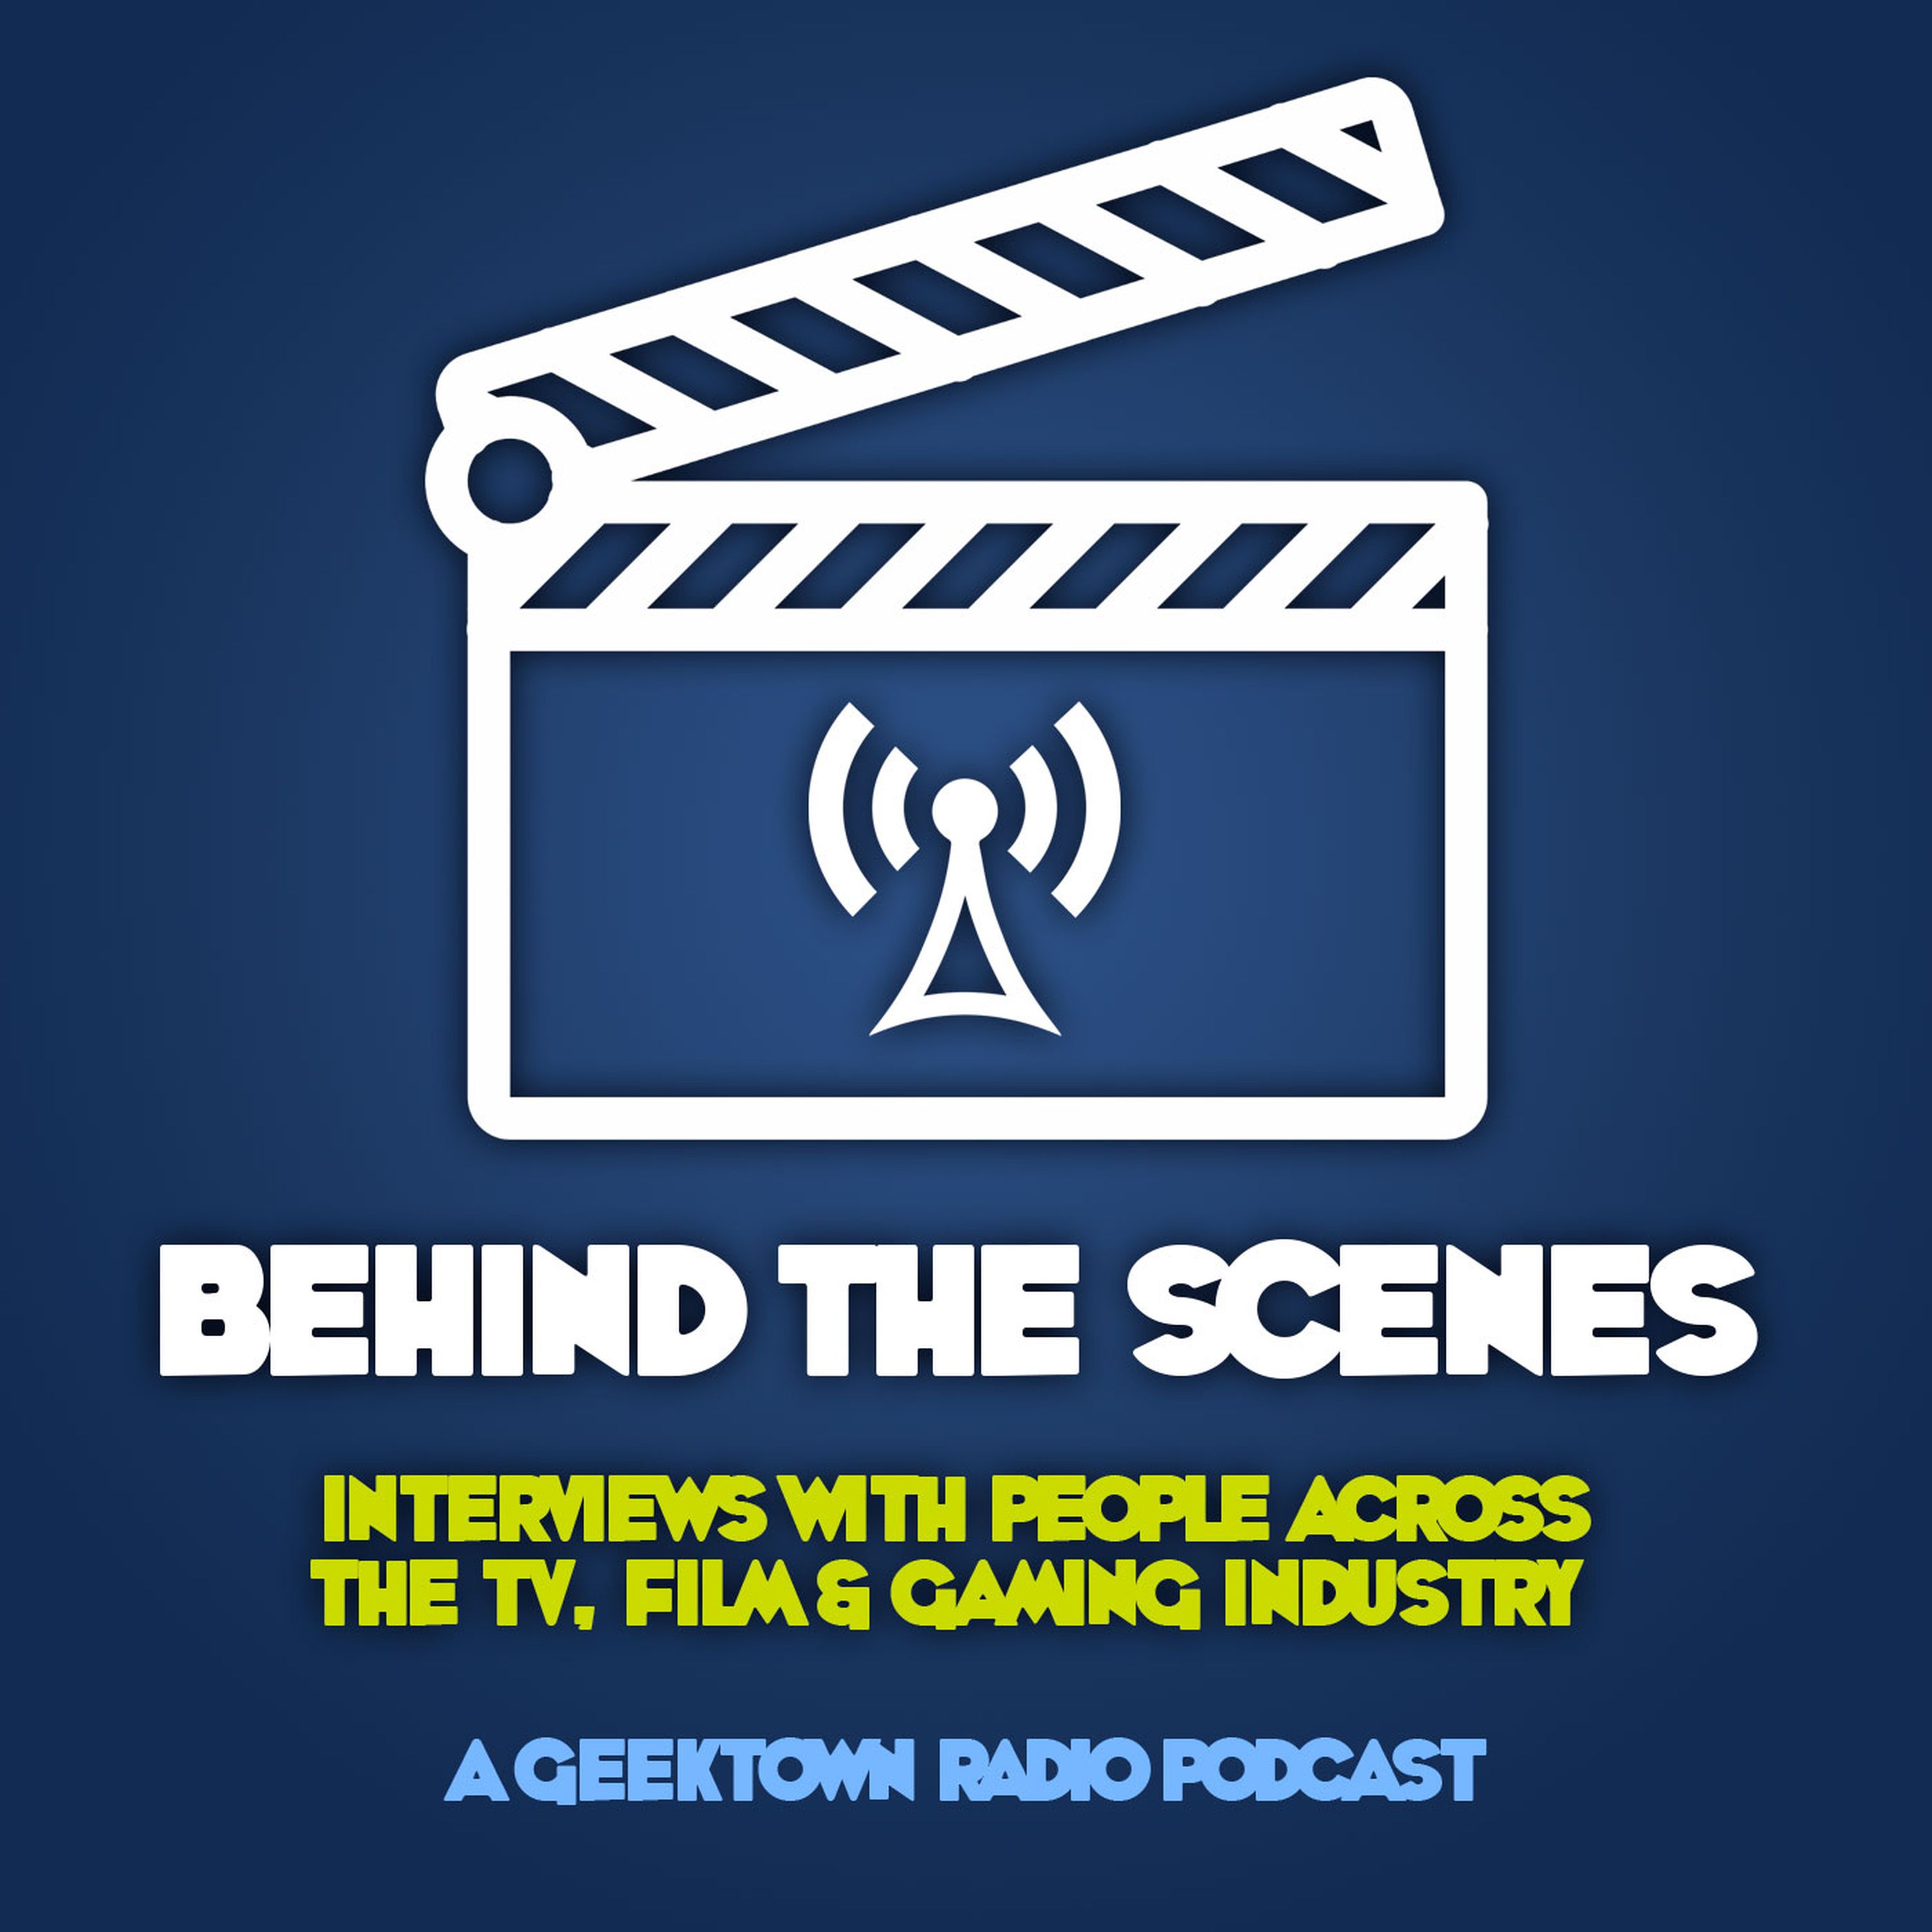 Geektown Behind The Scenes Podcast 01: Dianna Cowern aka Physics Girl Talks BBC/YouTube Special 'The Edge of Science'